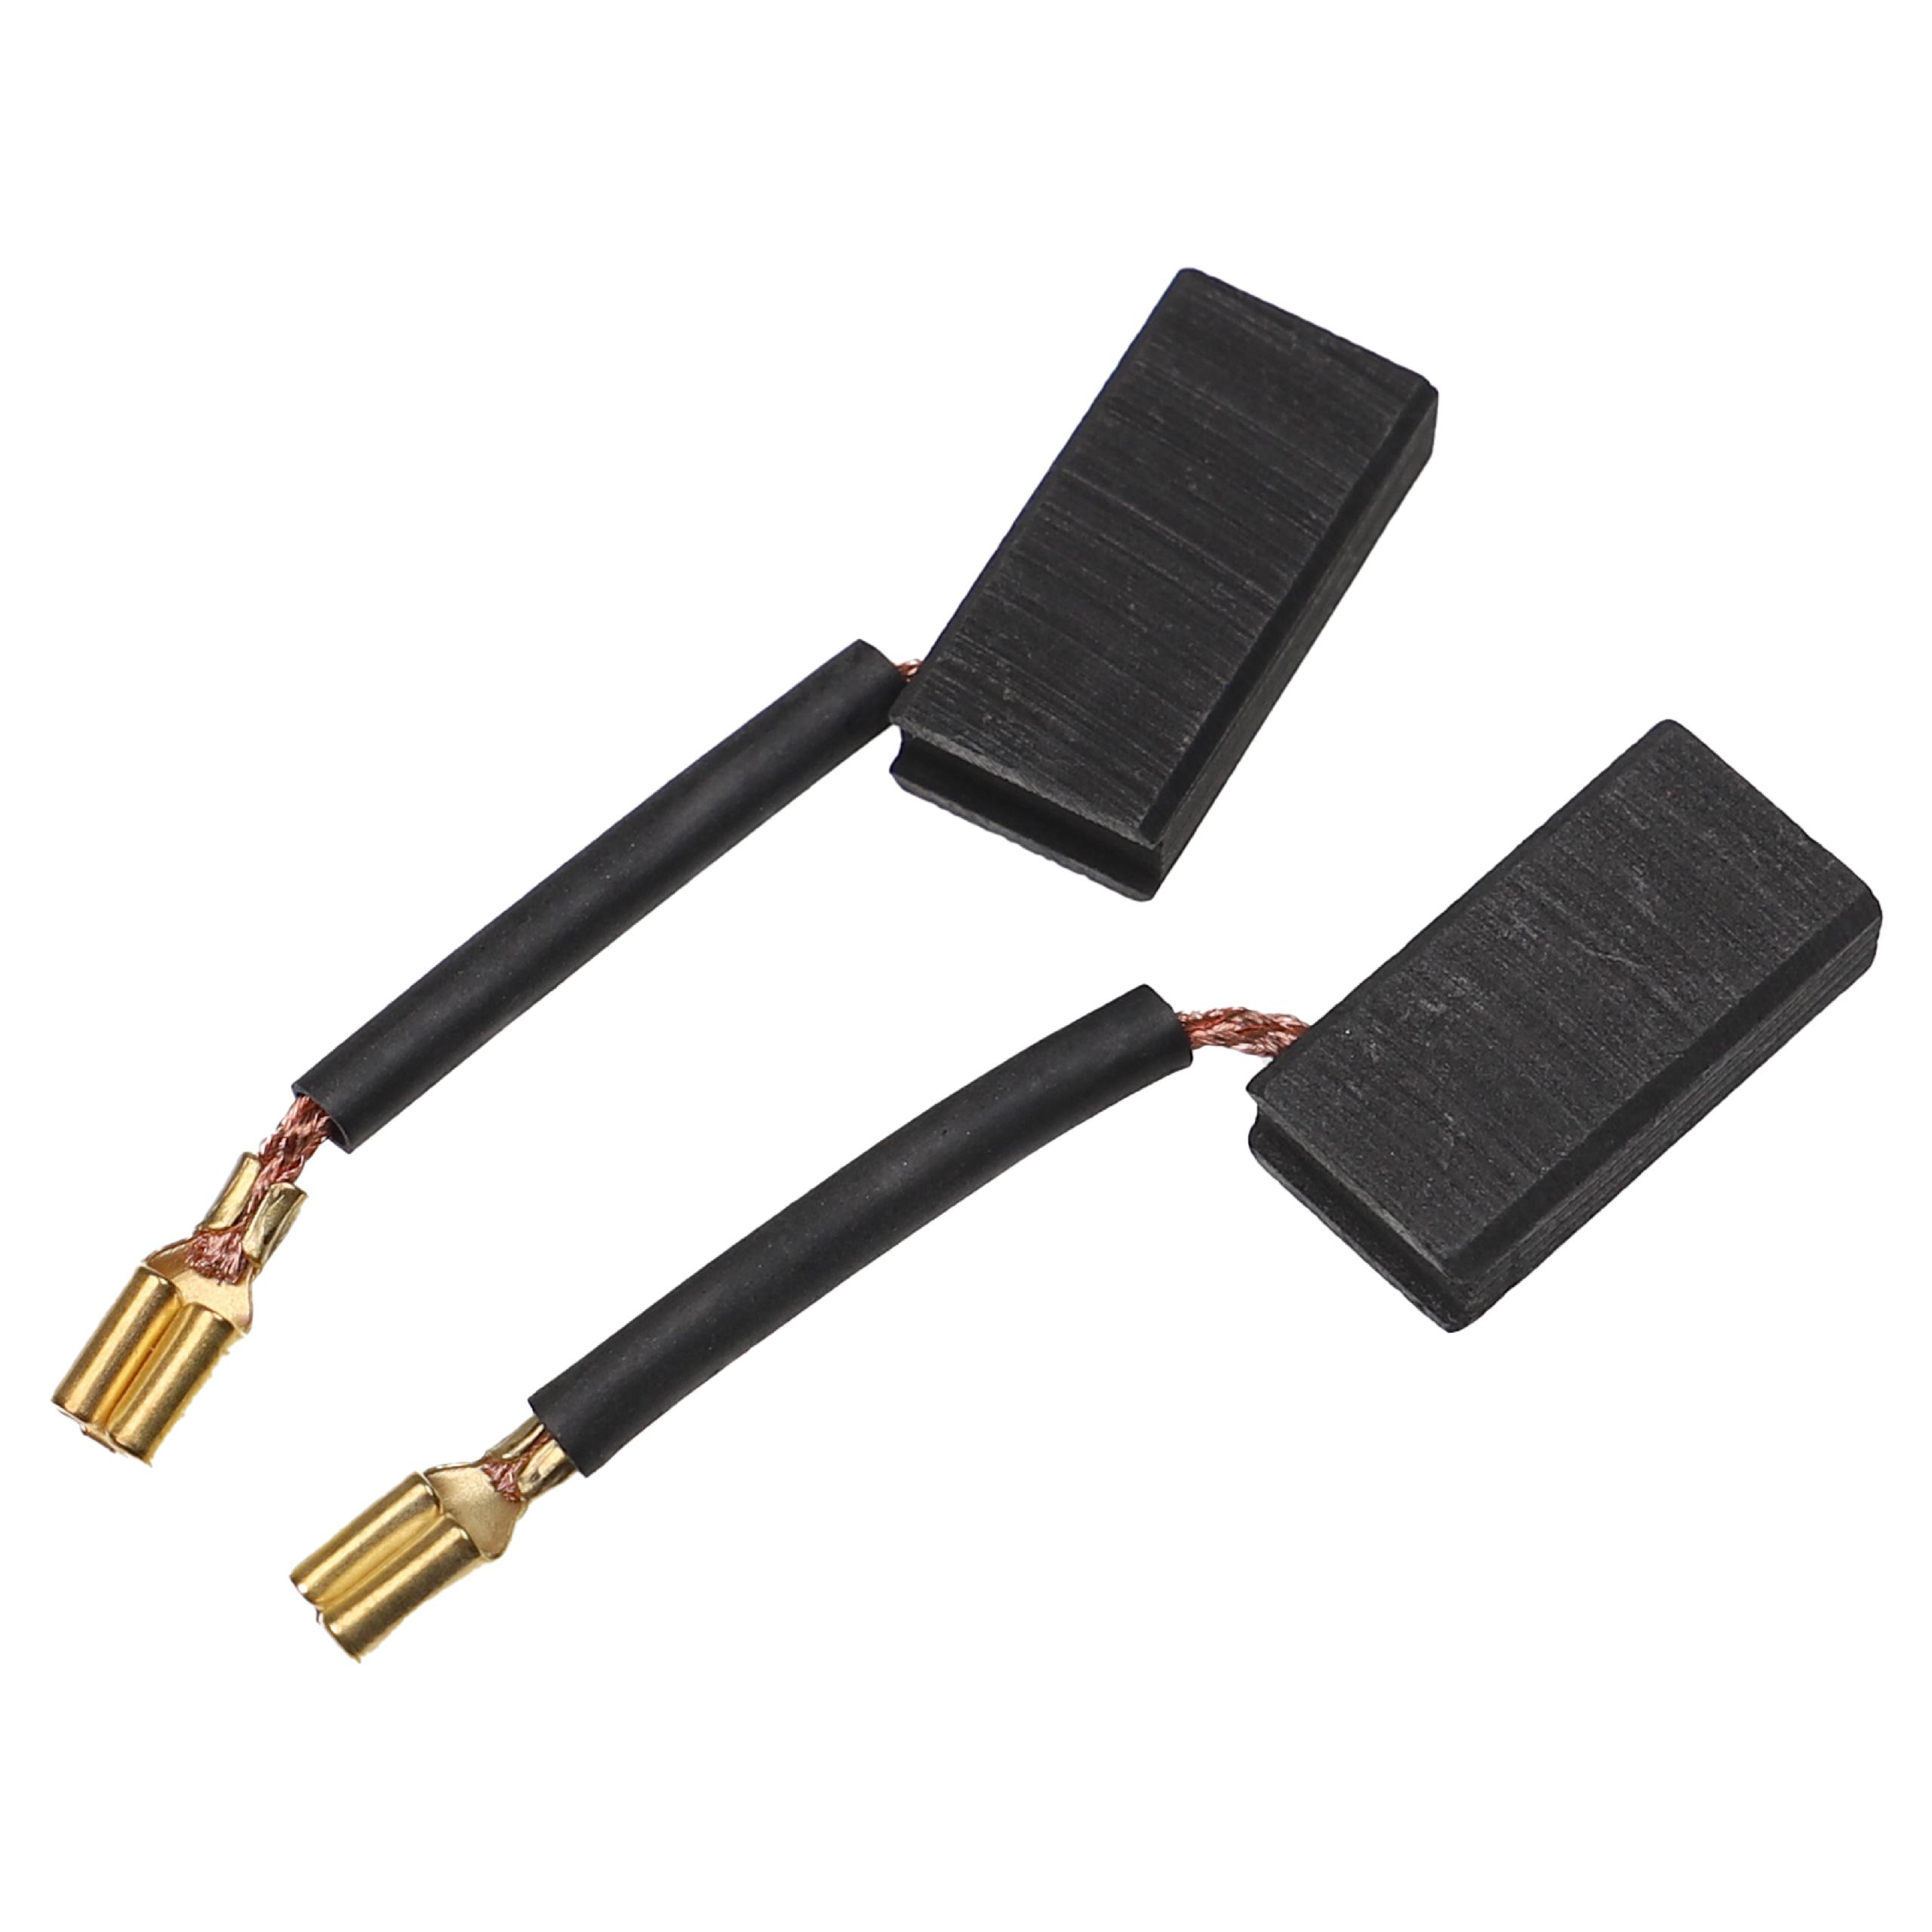 2x Carbon Brush as Replacement for Berner 584429-00 Electric Power Tools, 5.2 x 9.5 x 18mm